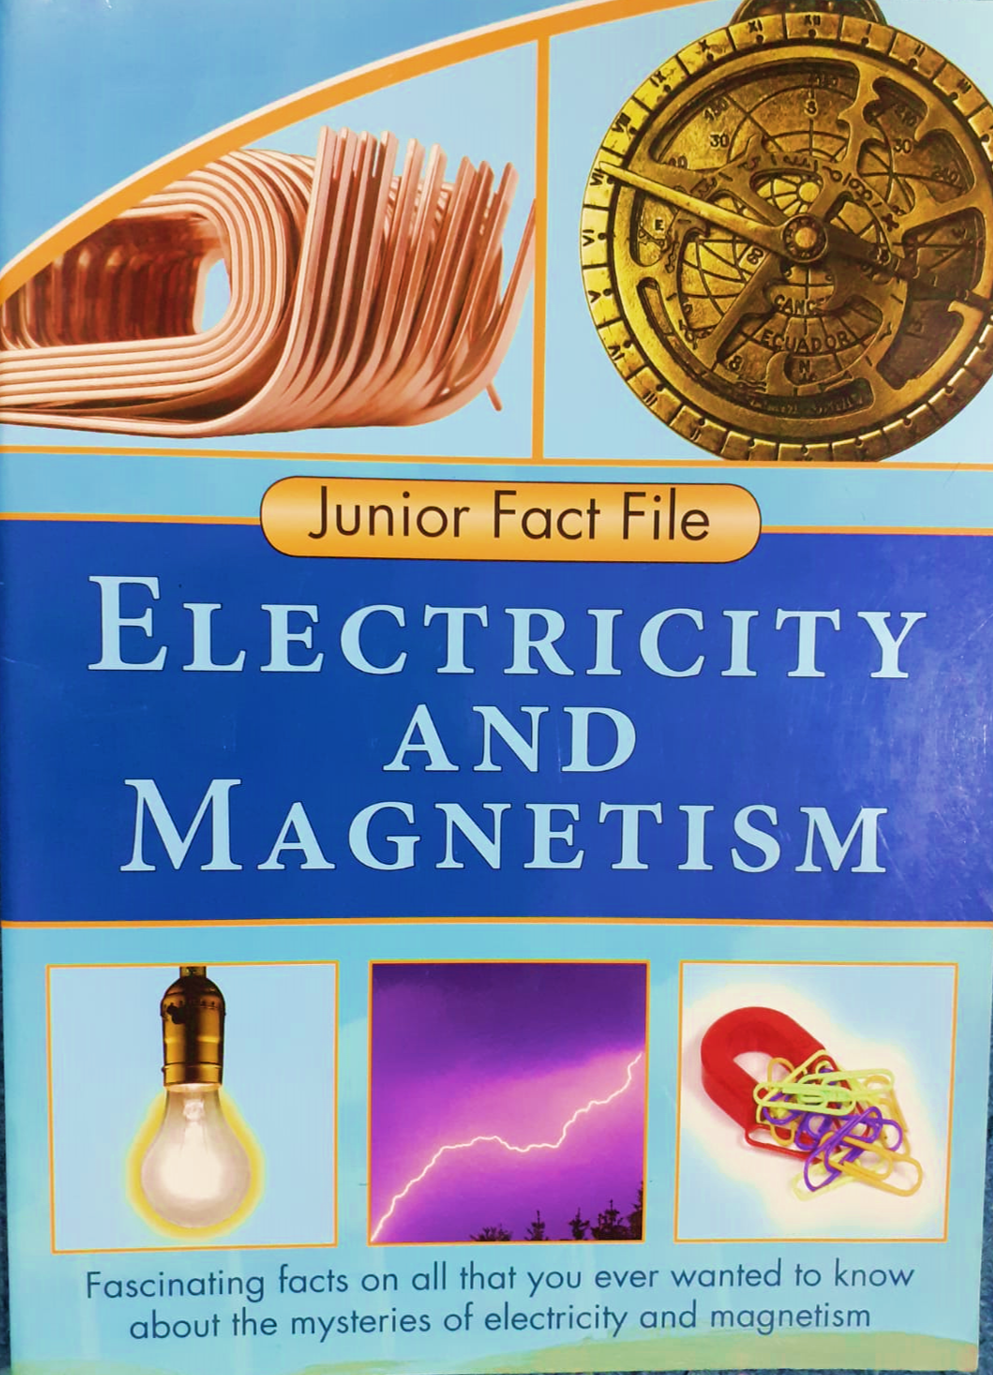 JUNIOR FACT FILE - ELECTRICITY AND MAGNETISM